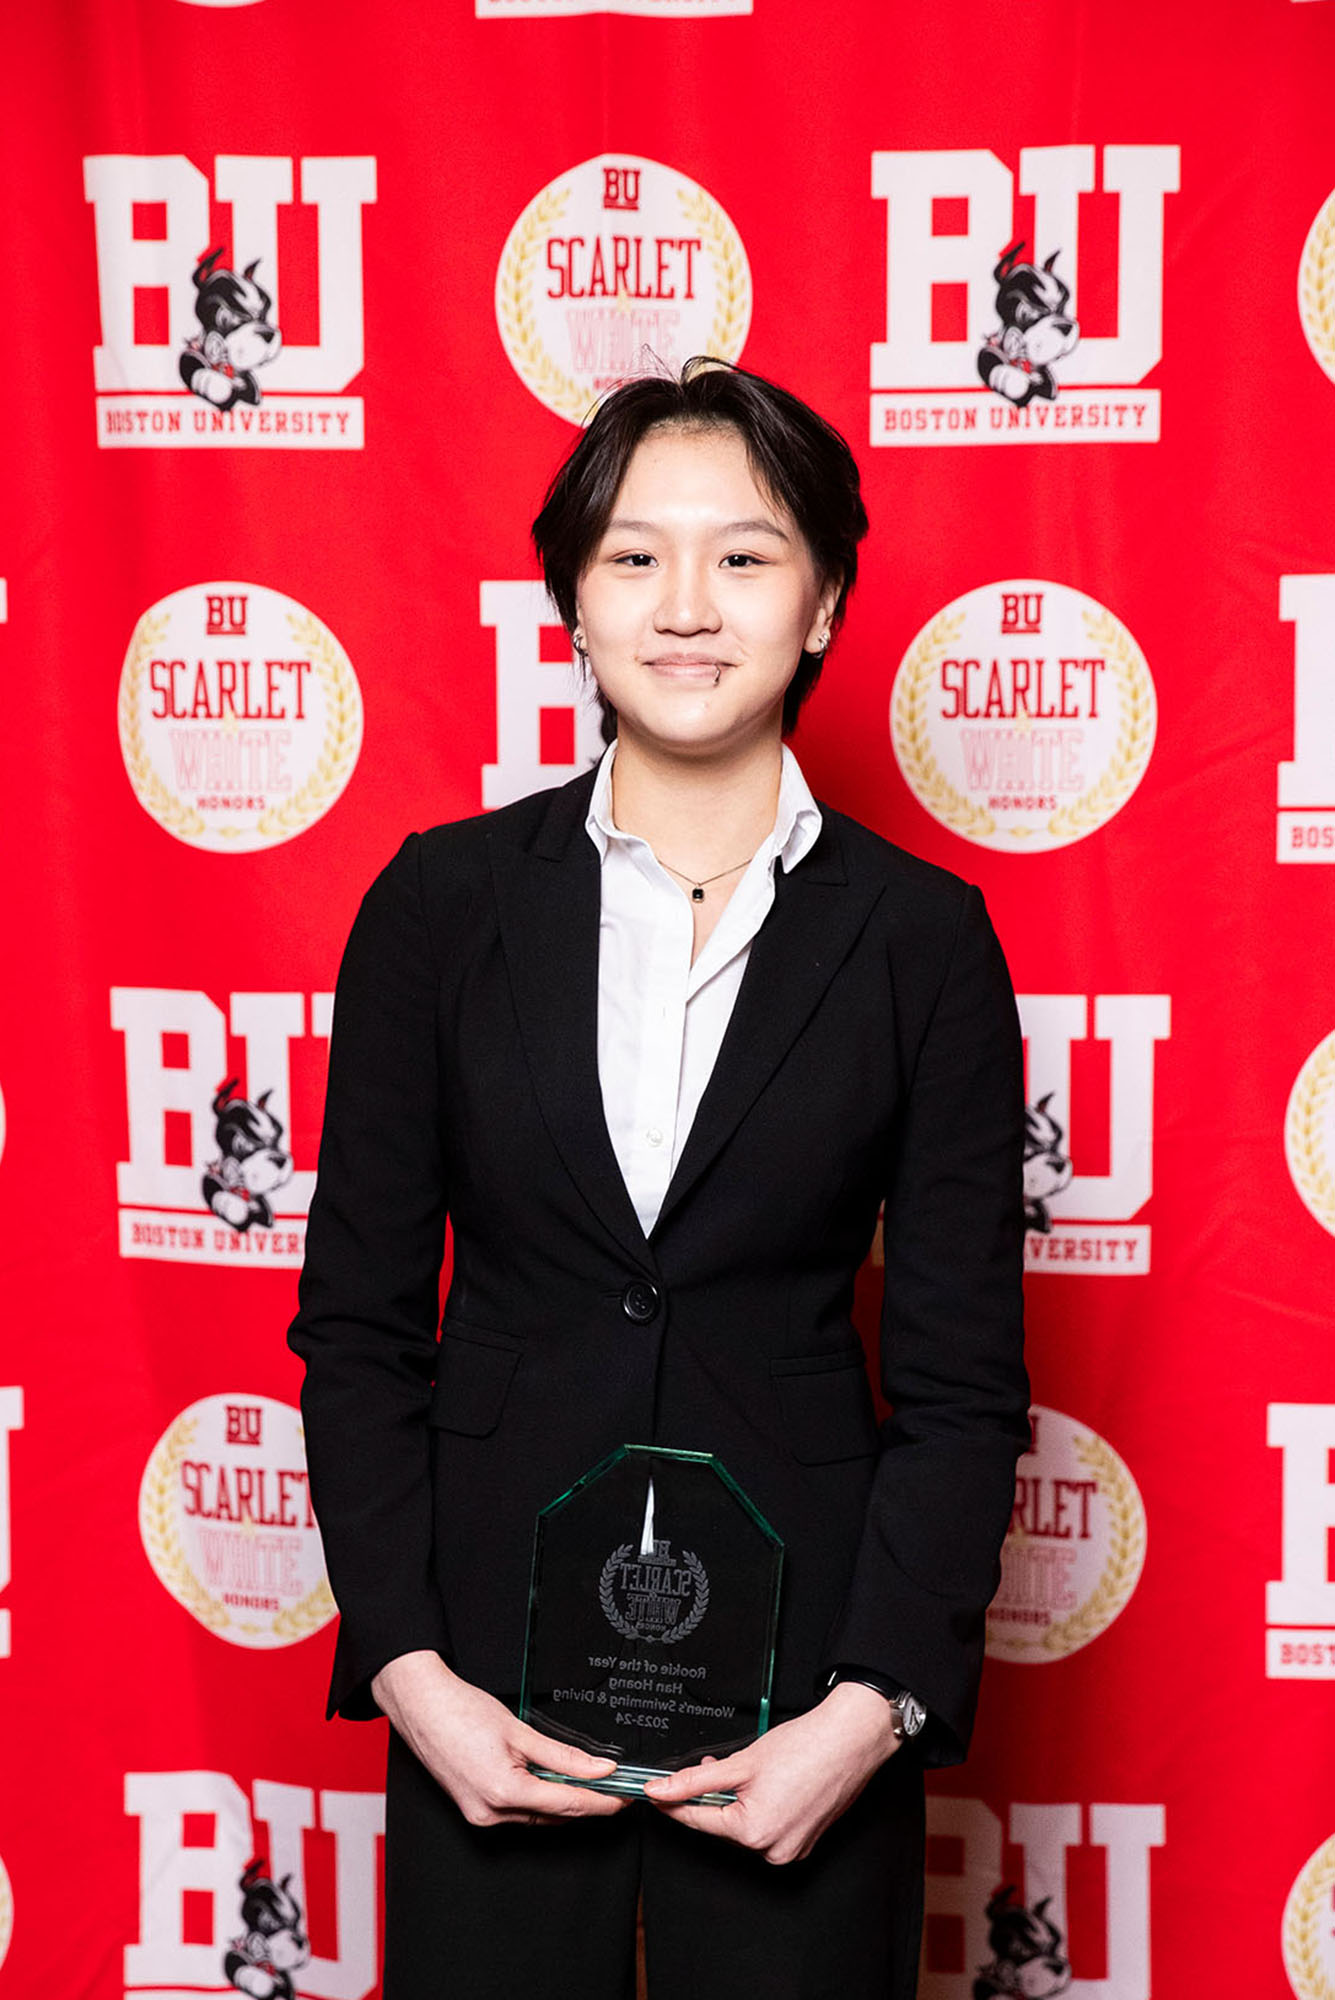 Photo: A picture of a woman in a black suit holding a clear award. There is a red background that says "BU" behind her